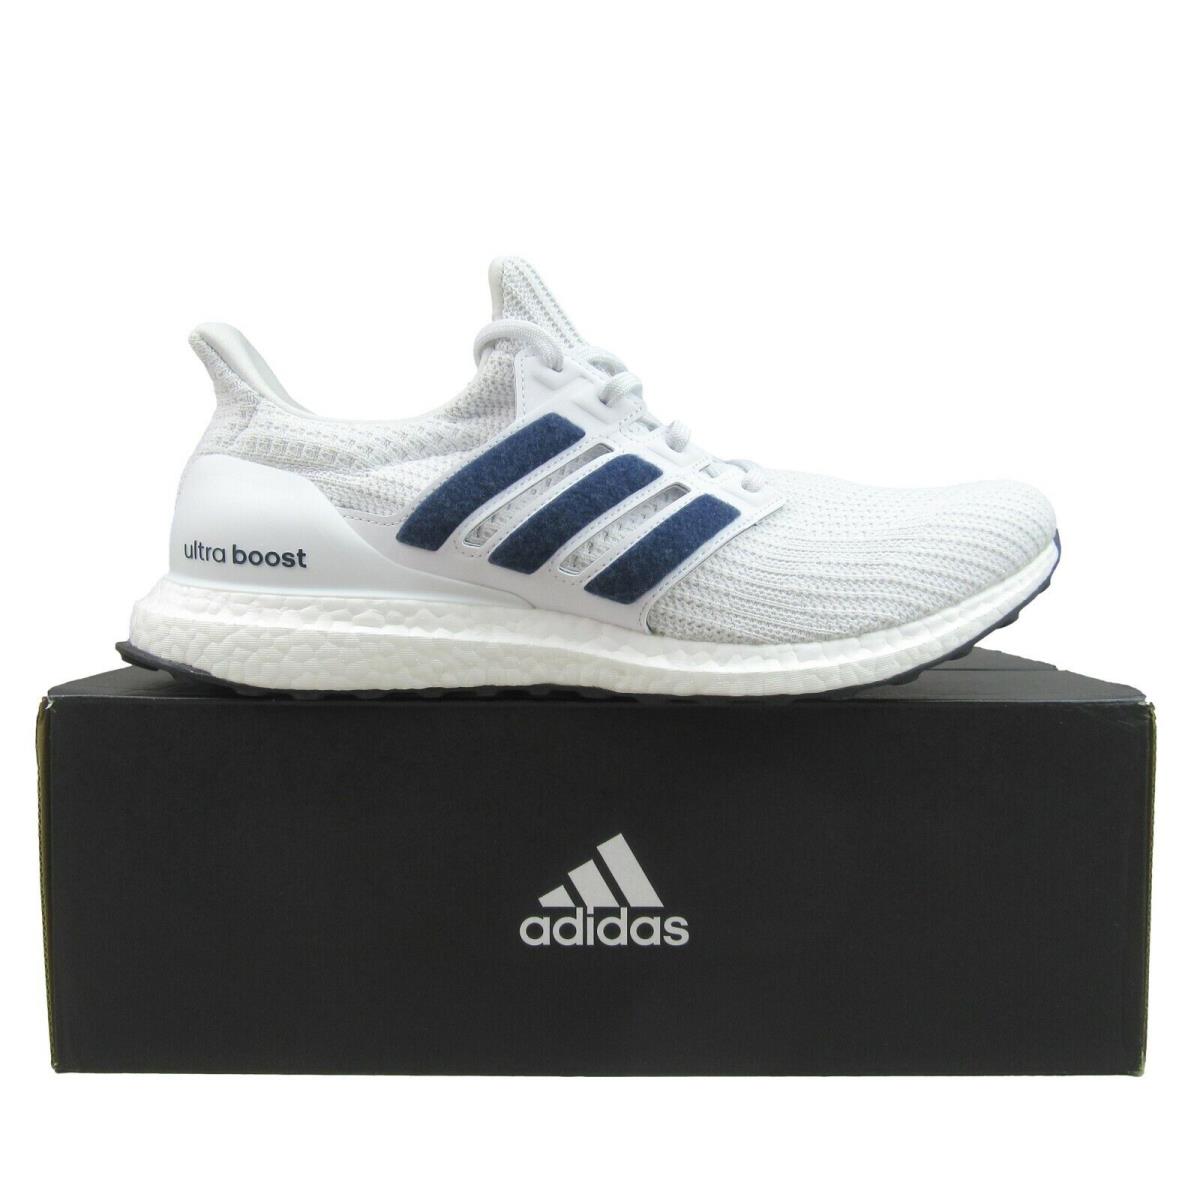 Adidas Ultraboost 4.0 Dna Running Shoes Mens Size 13 Navy White FY9337